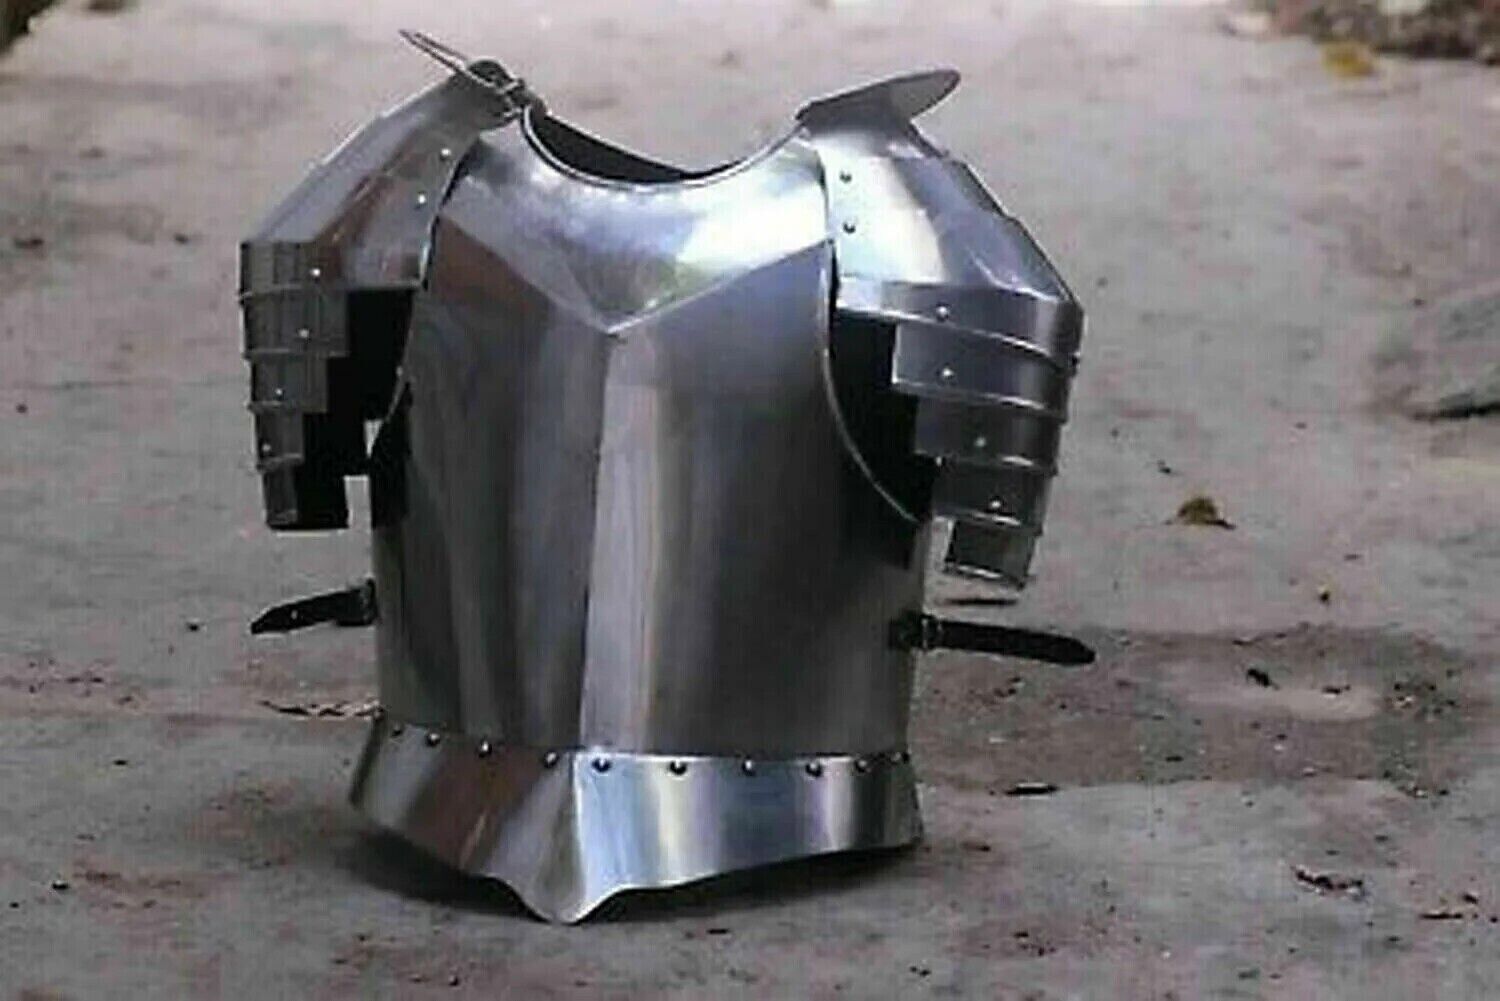 18 gauge steel medieval knight armor cuirass with... LARP